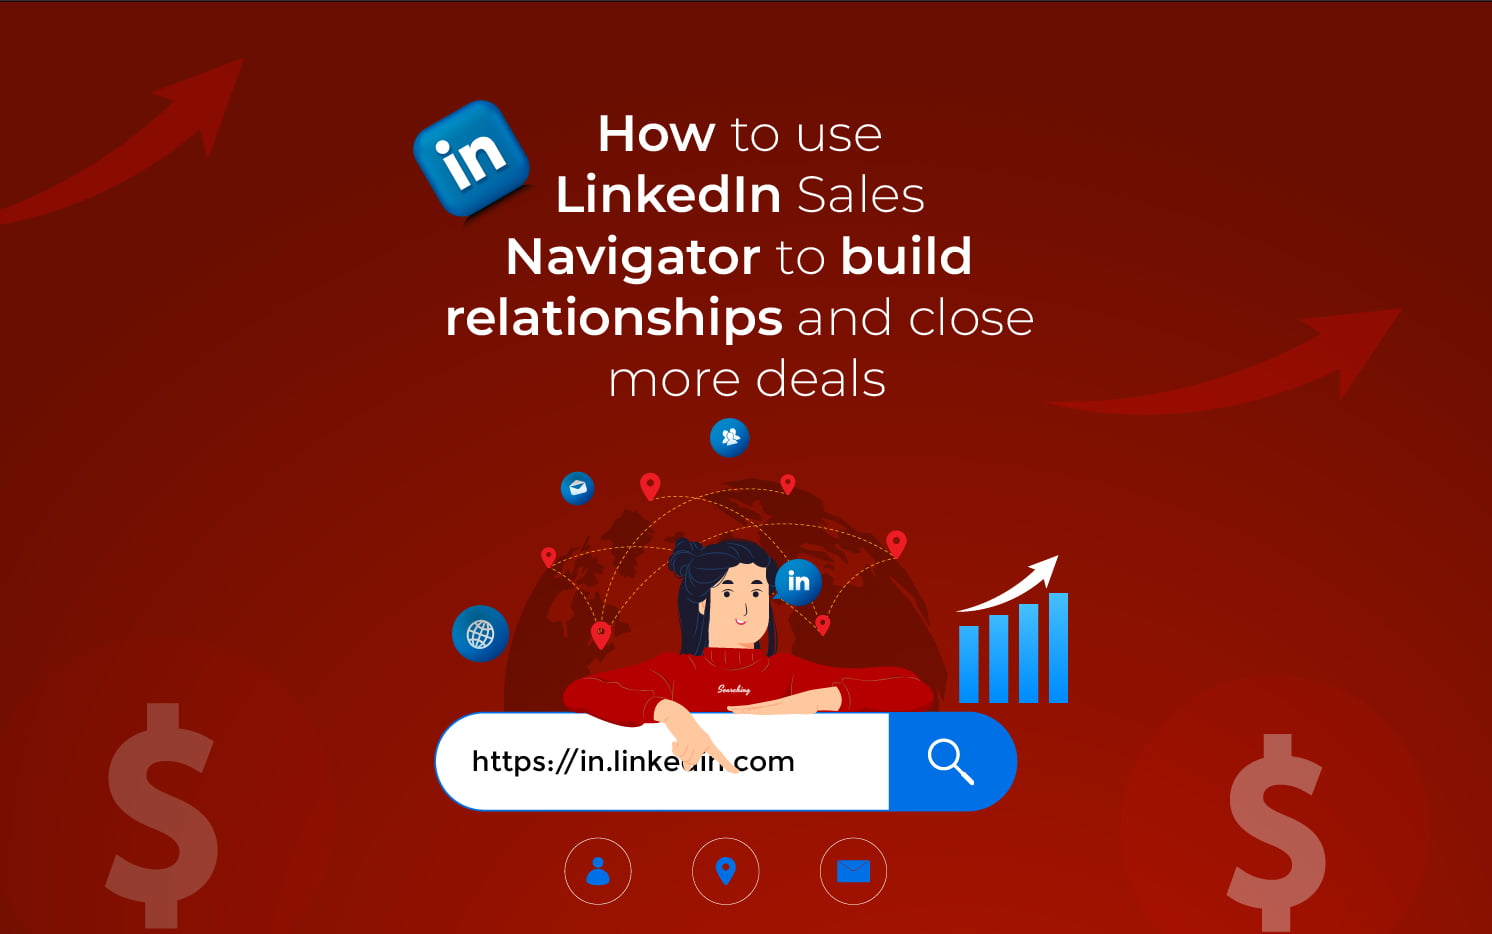 How to use LinkedIn Sales Navigator to build relationships and close more deals.